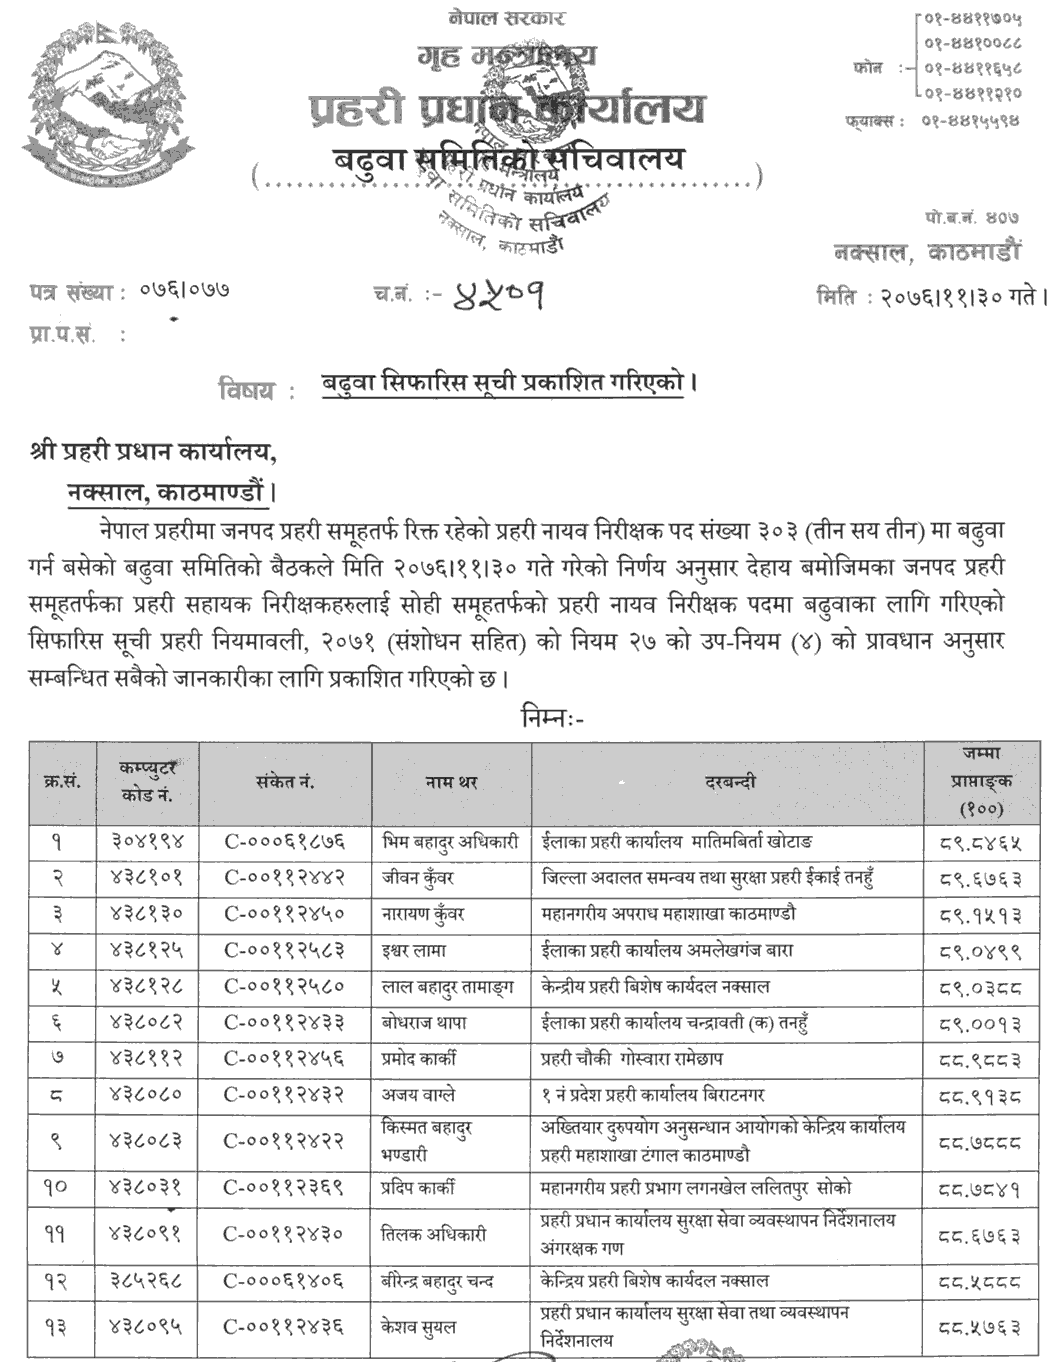 Nepal Police ASI to SI Post Promotion Recommendation List